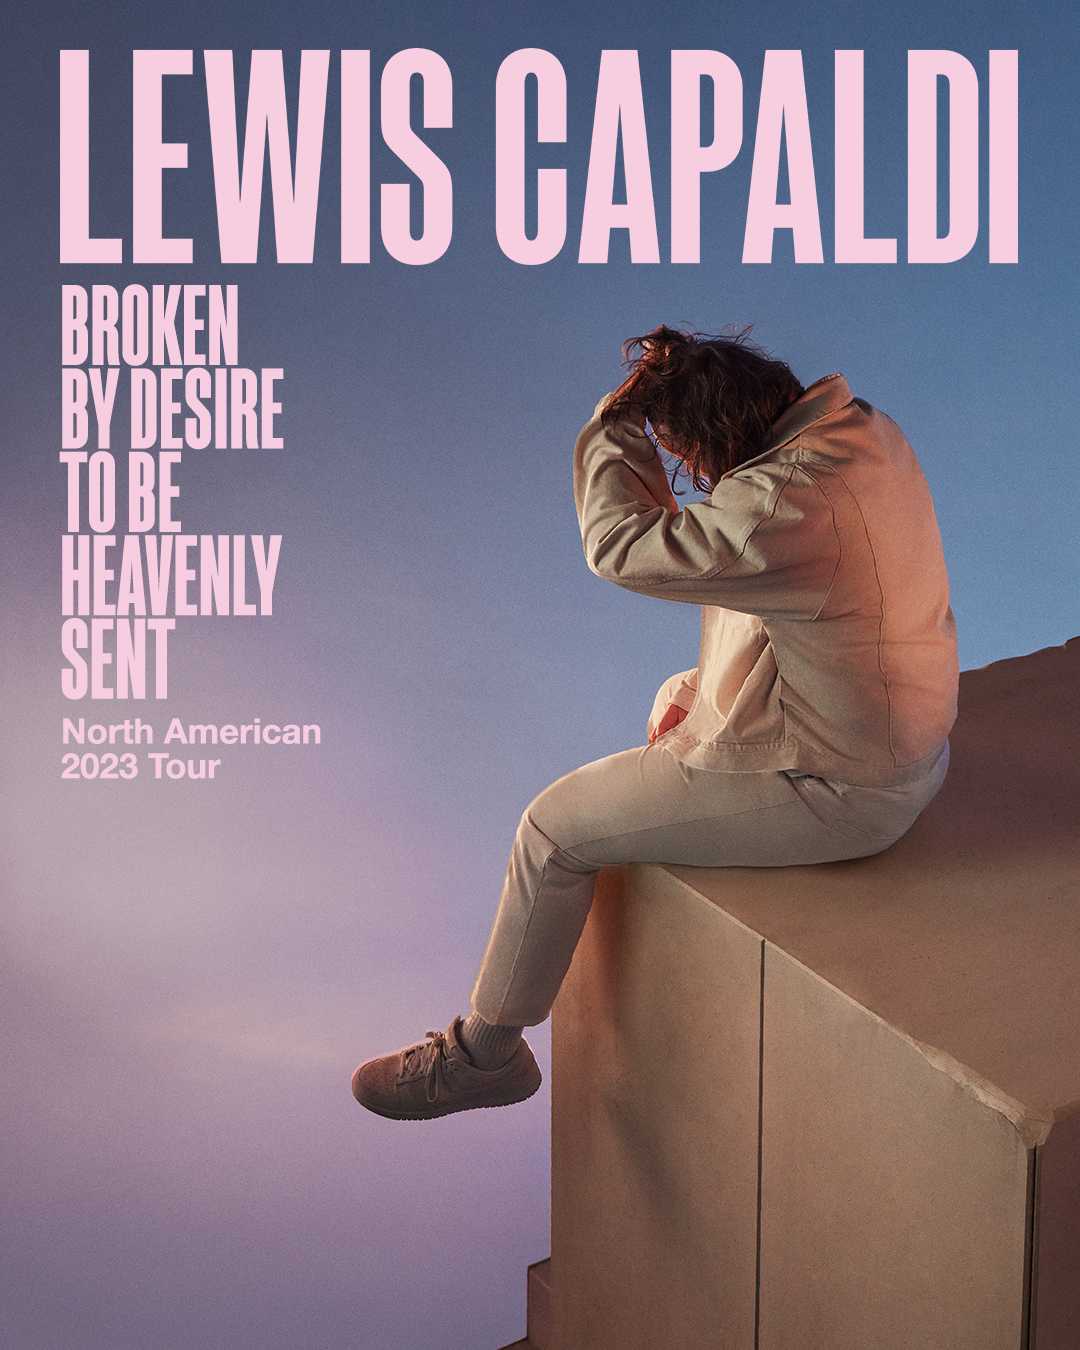 Lewis Capaldi live in concert at Theater of the Clouds April 28th, 2023